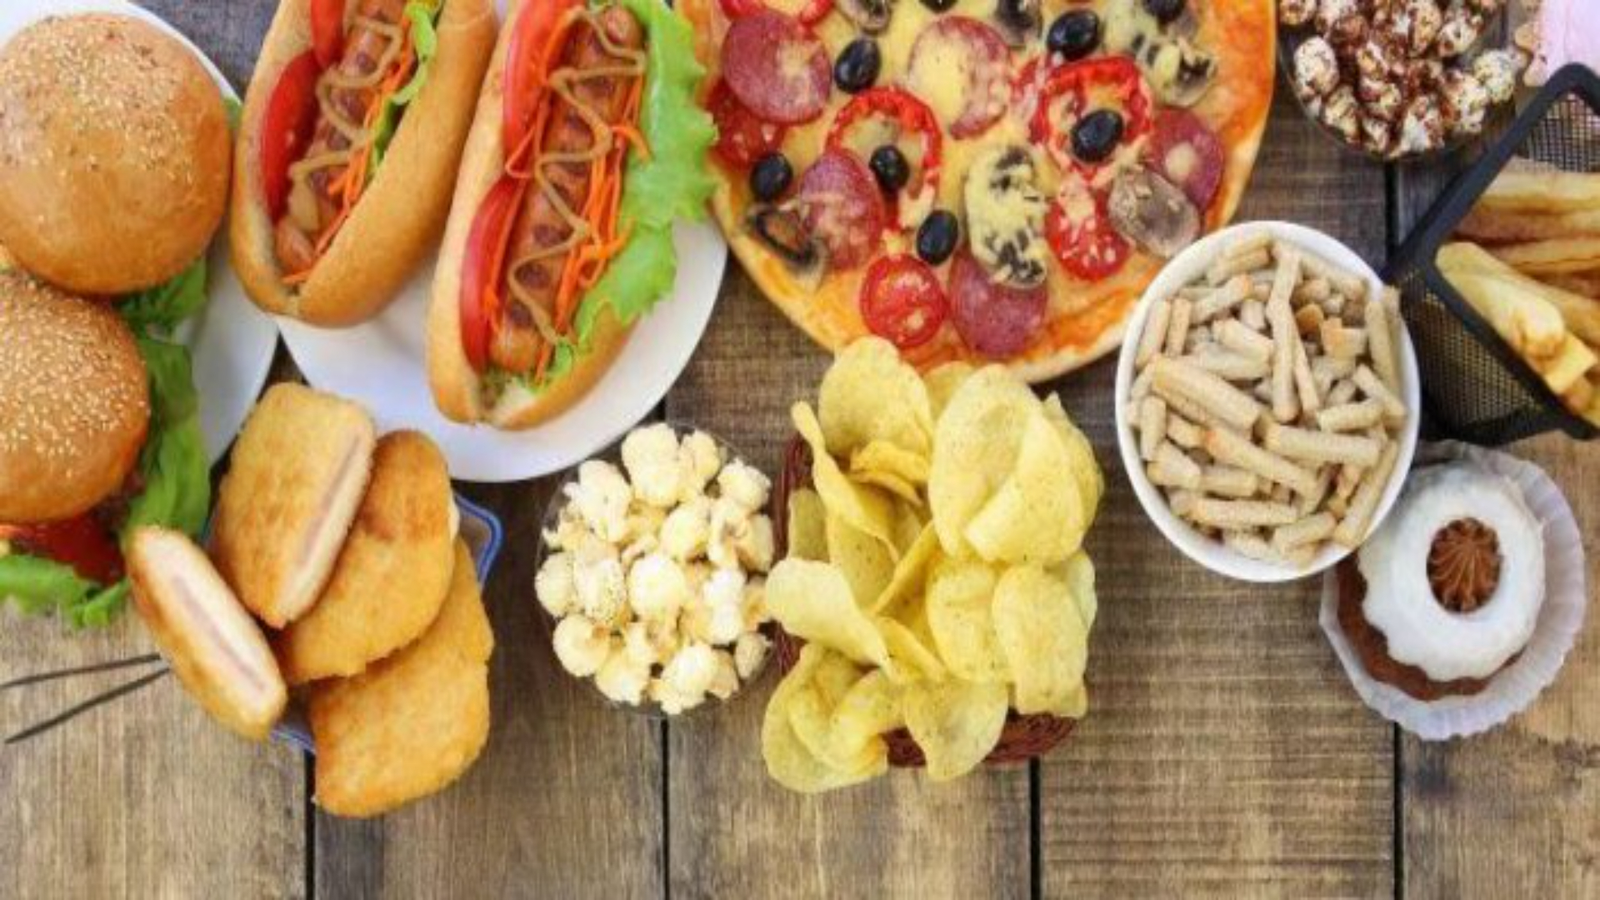 Study links ultra-processed foods to elevated risk of death